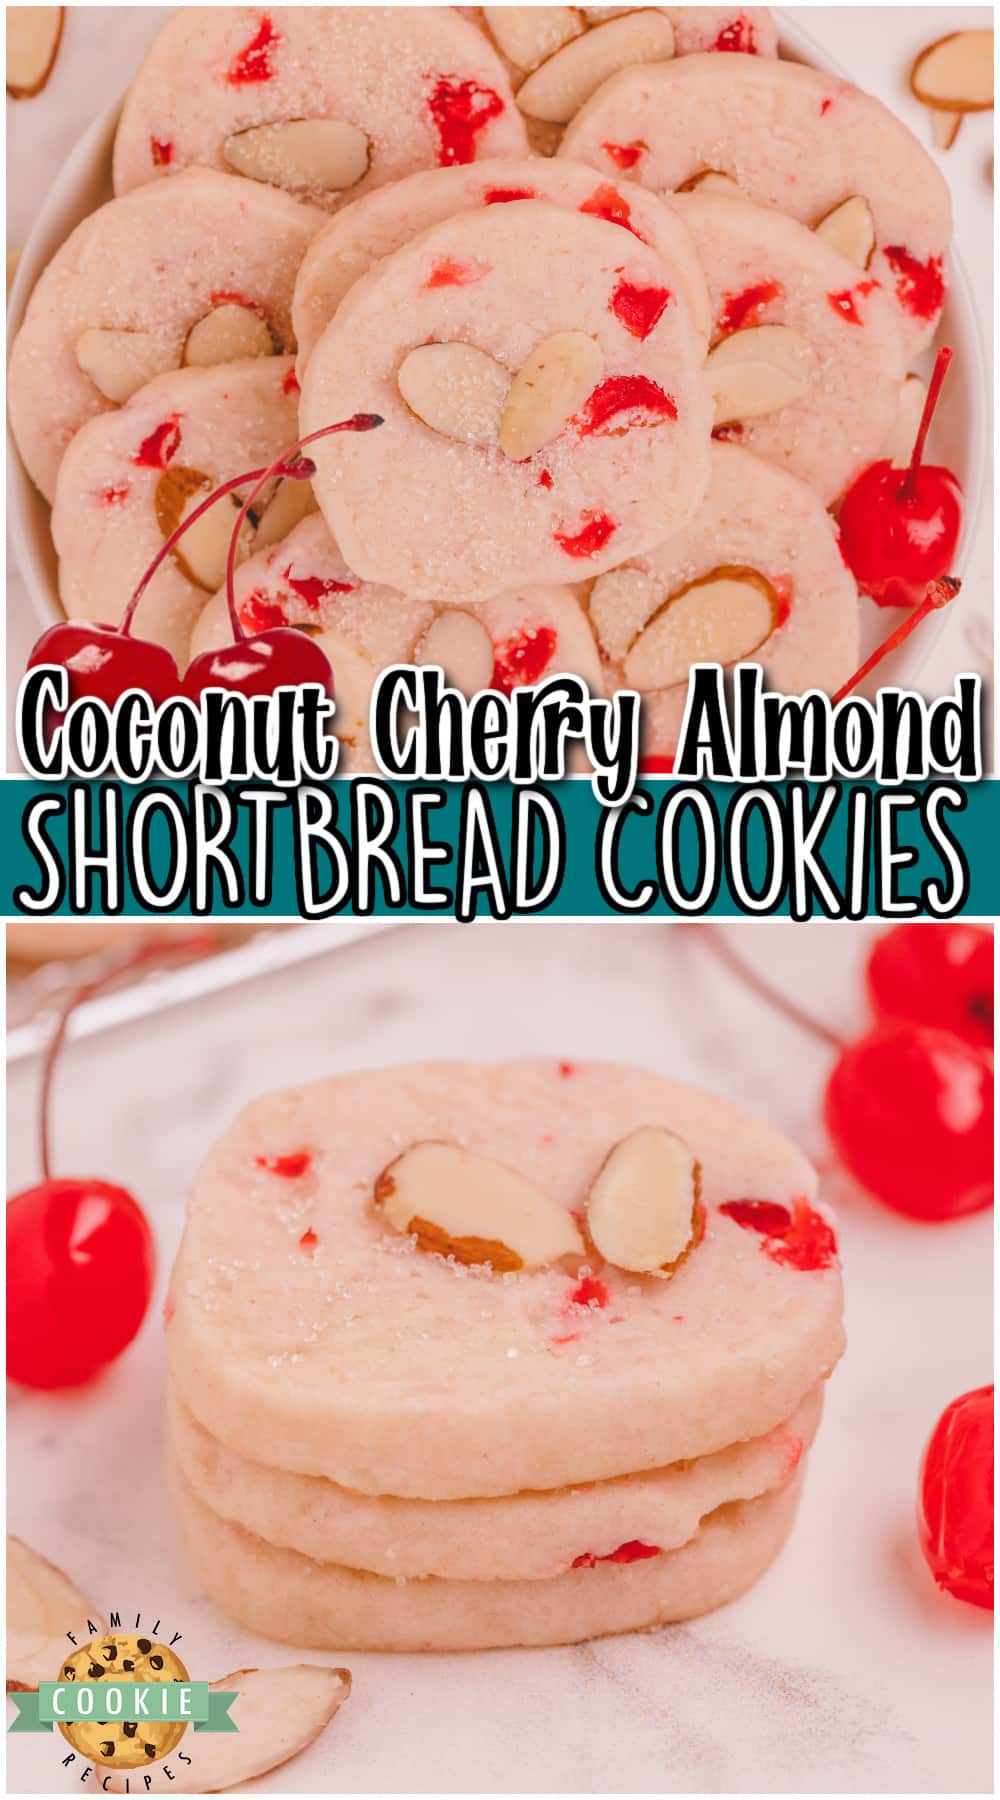 Coconut Almond Cherry Shortbread Cookies are tender, buttery cookies with lovely cherry flavor! This recipe for almond shortbread cookies is made with juicy cherries, coconut & sliced almonds.